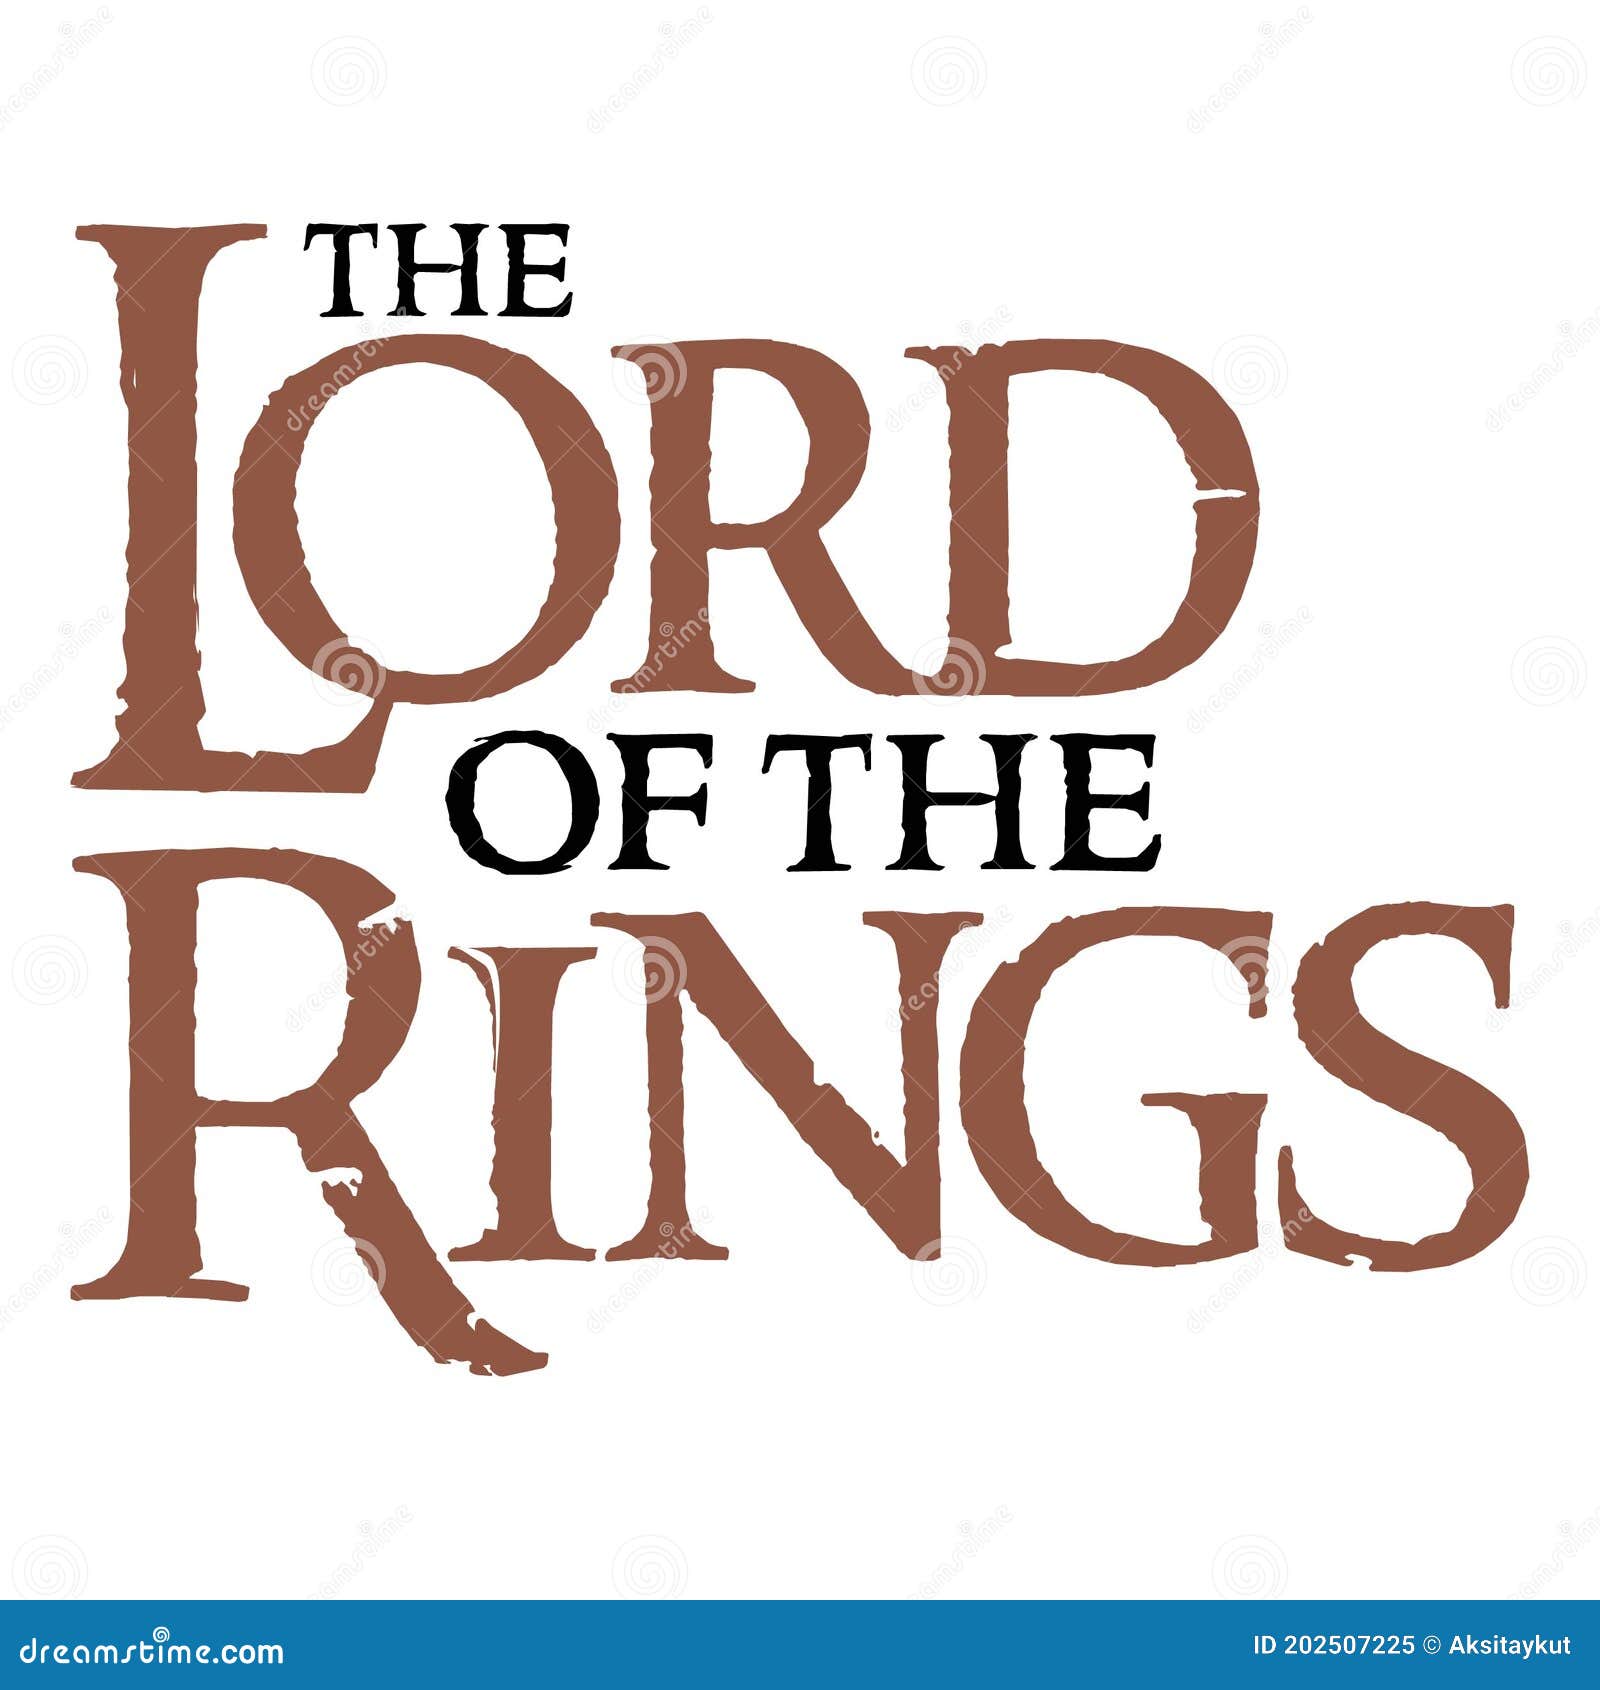 Buy The Lord of The Rings: The Fellowship of The Ring (Extended Edition) -  Microsoft Store